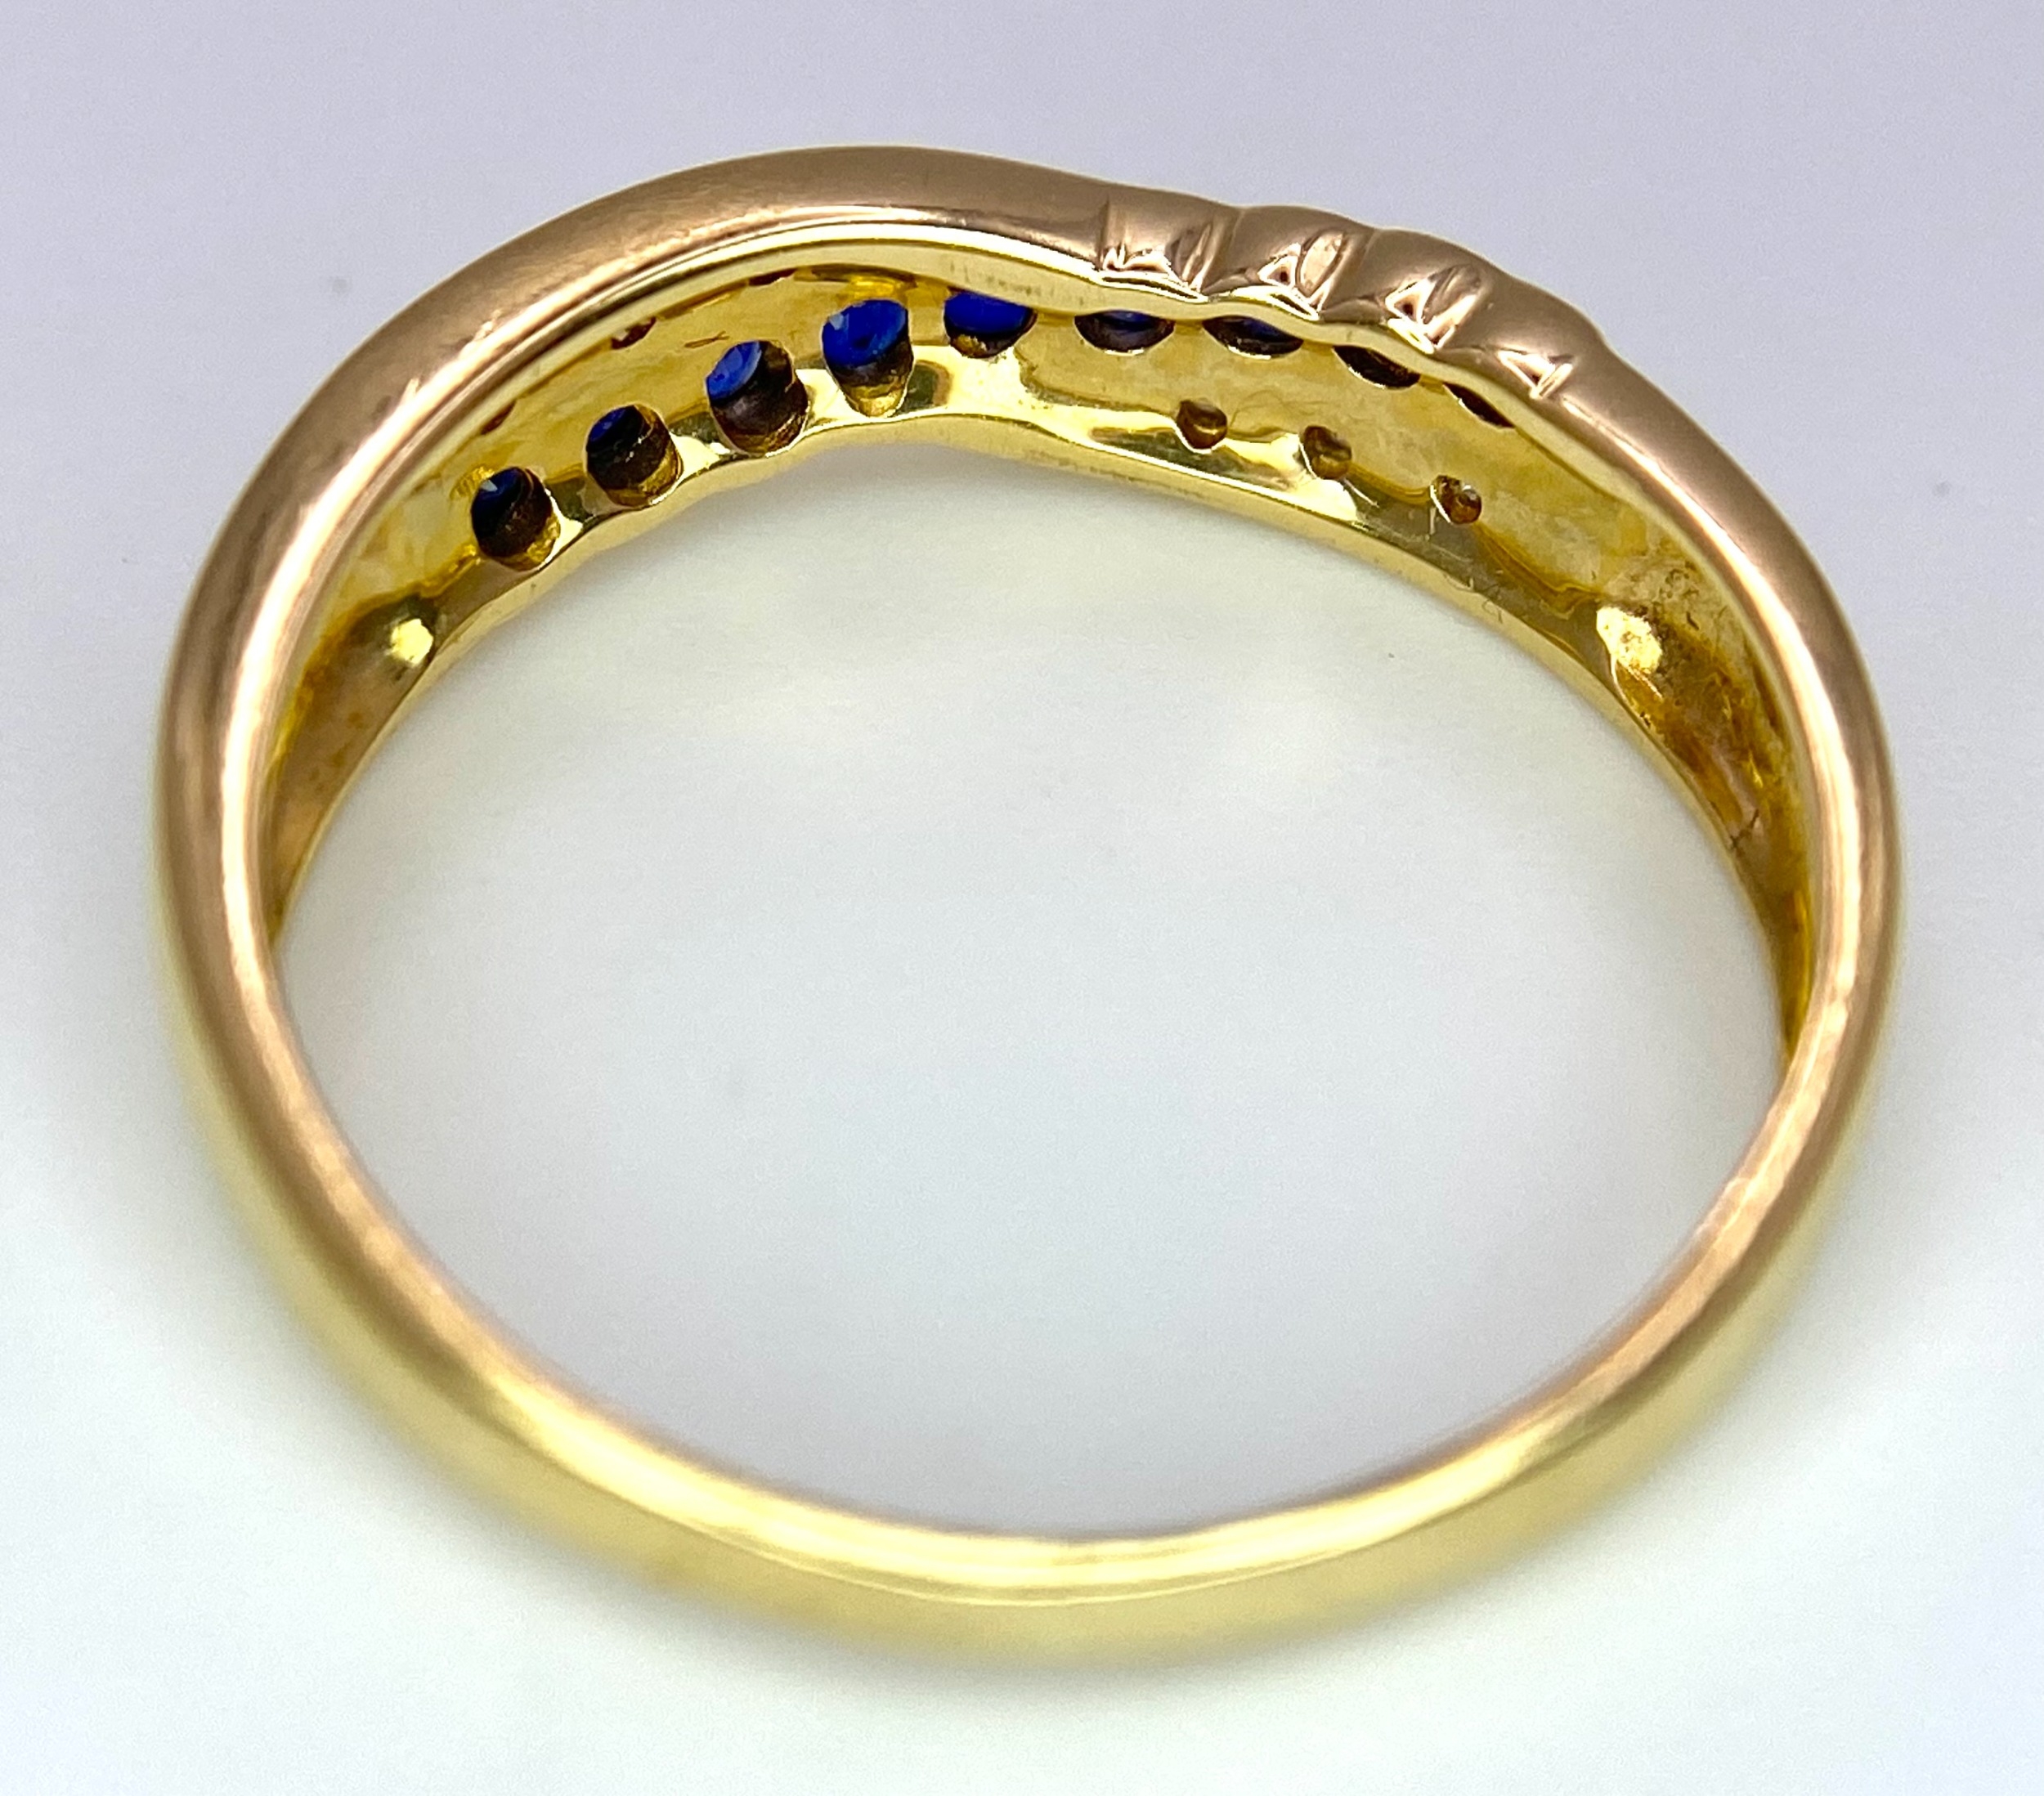 AN 18K YELLOW GOLD DIAMOND & BLUE STONE (PROBABLY SAPPHIRE) CROSSOVER RING. Size O, 2.7g total - Bild 4 aus 6